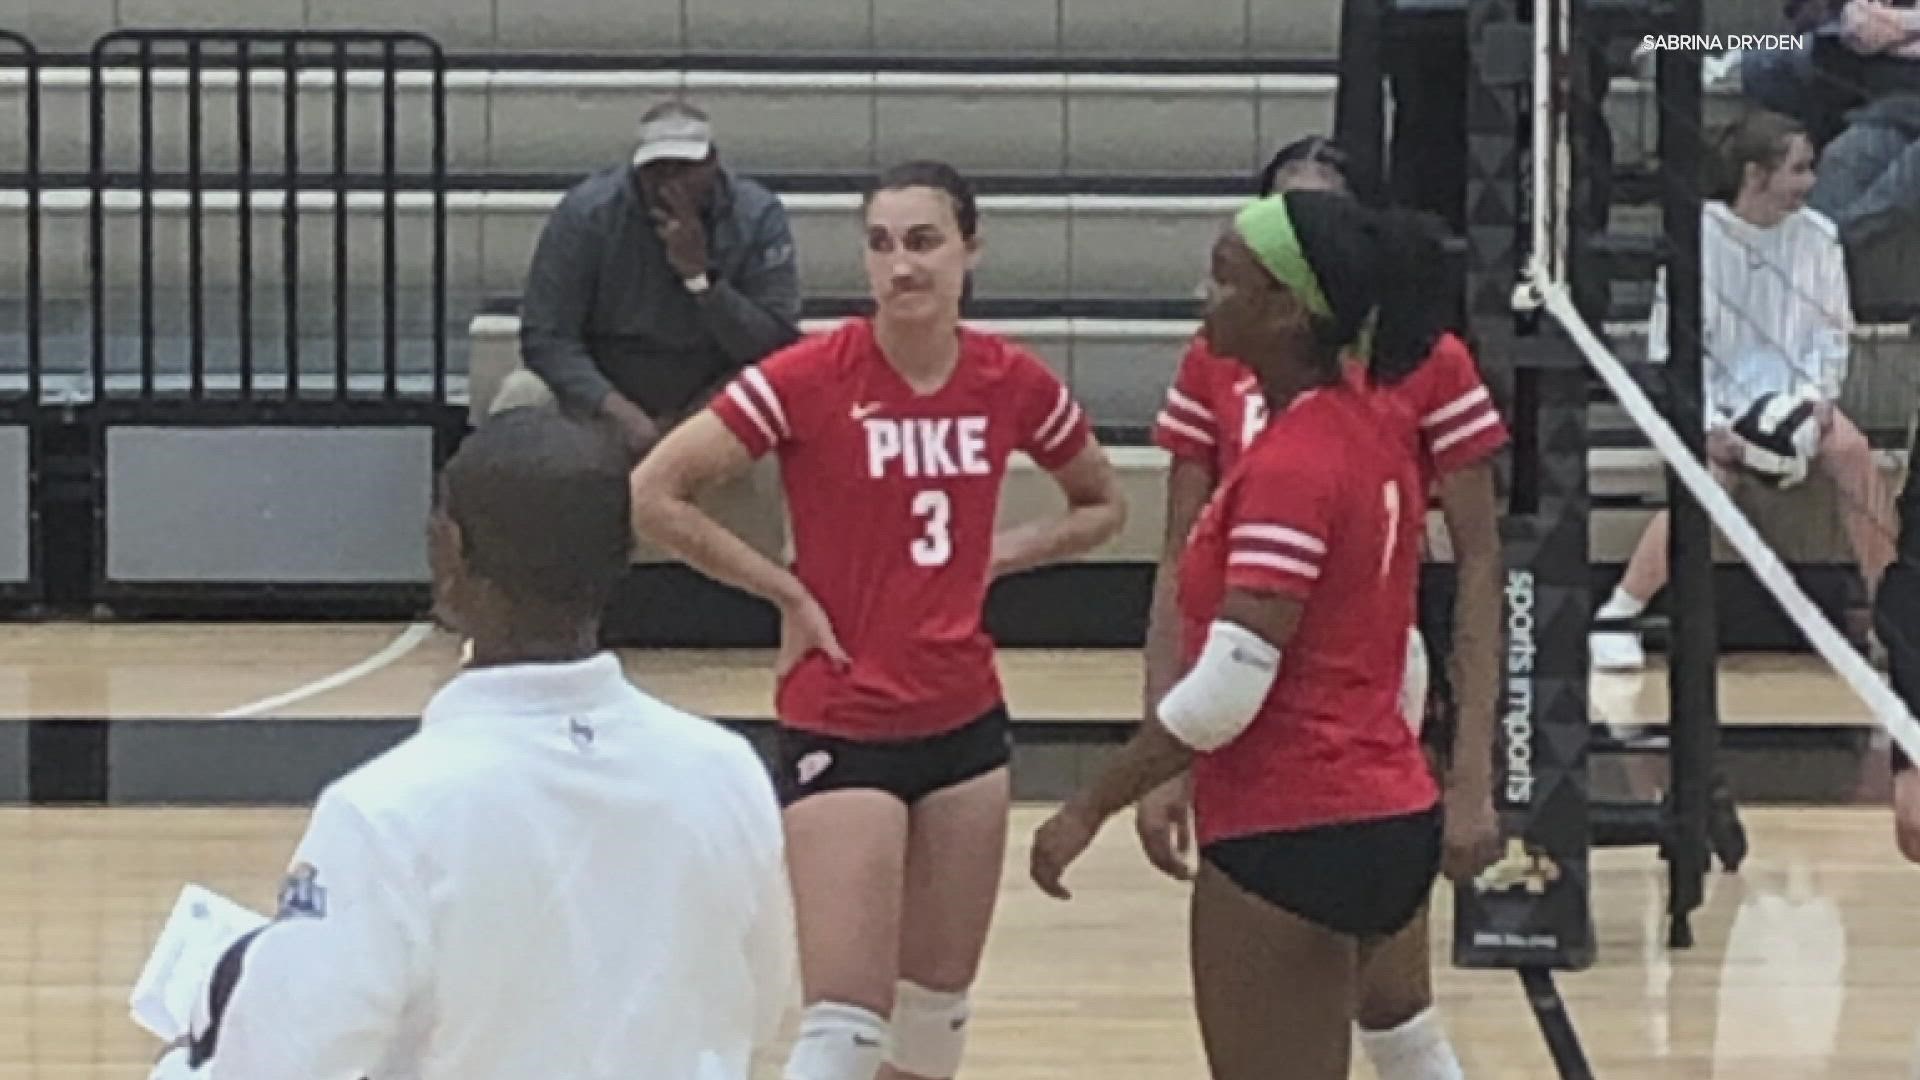 Parents of the Pike athletes say not enough has been done yet to address the harm caused by a player's racially hateful comments.